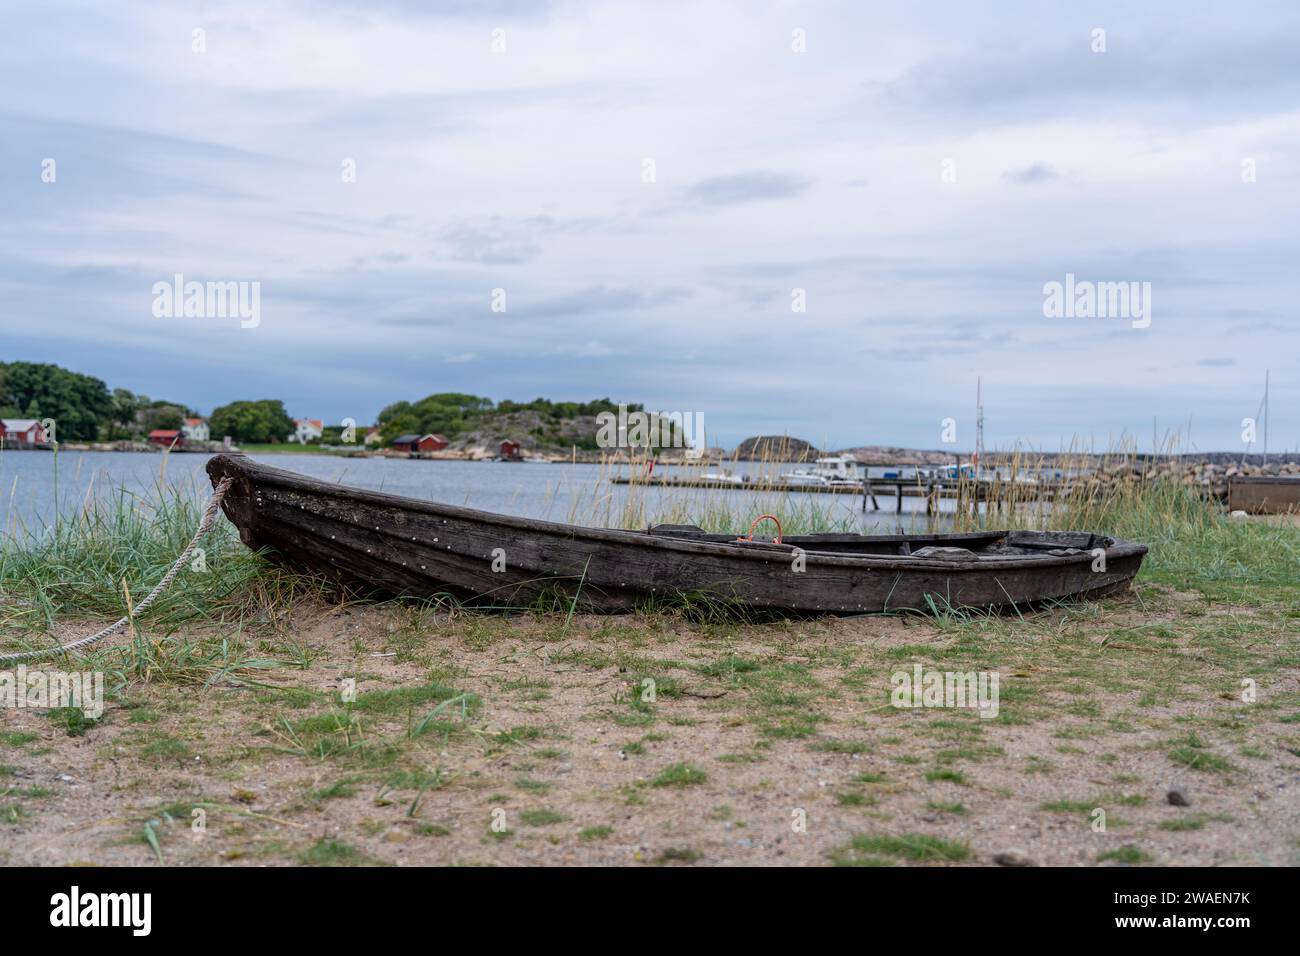 A small vessel rests atop a grassy meadow in Munkkyrkan, Smoegen, Sweden Stock Photo